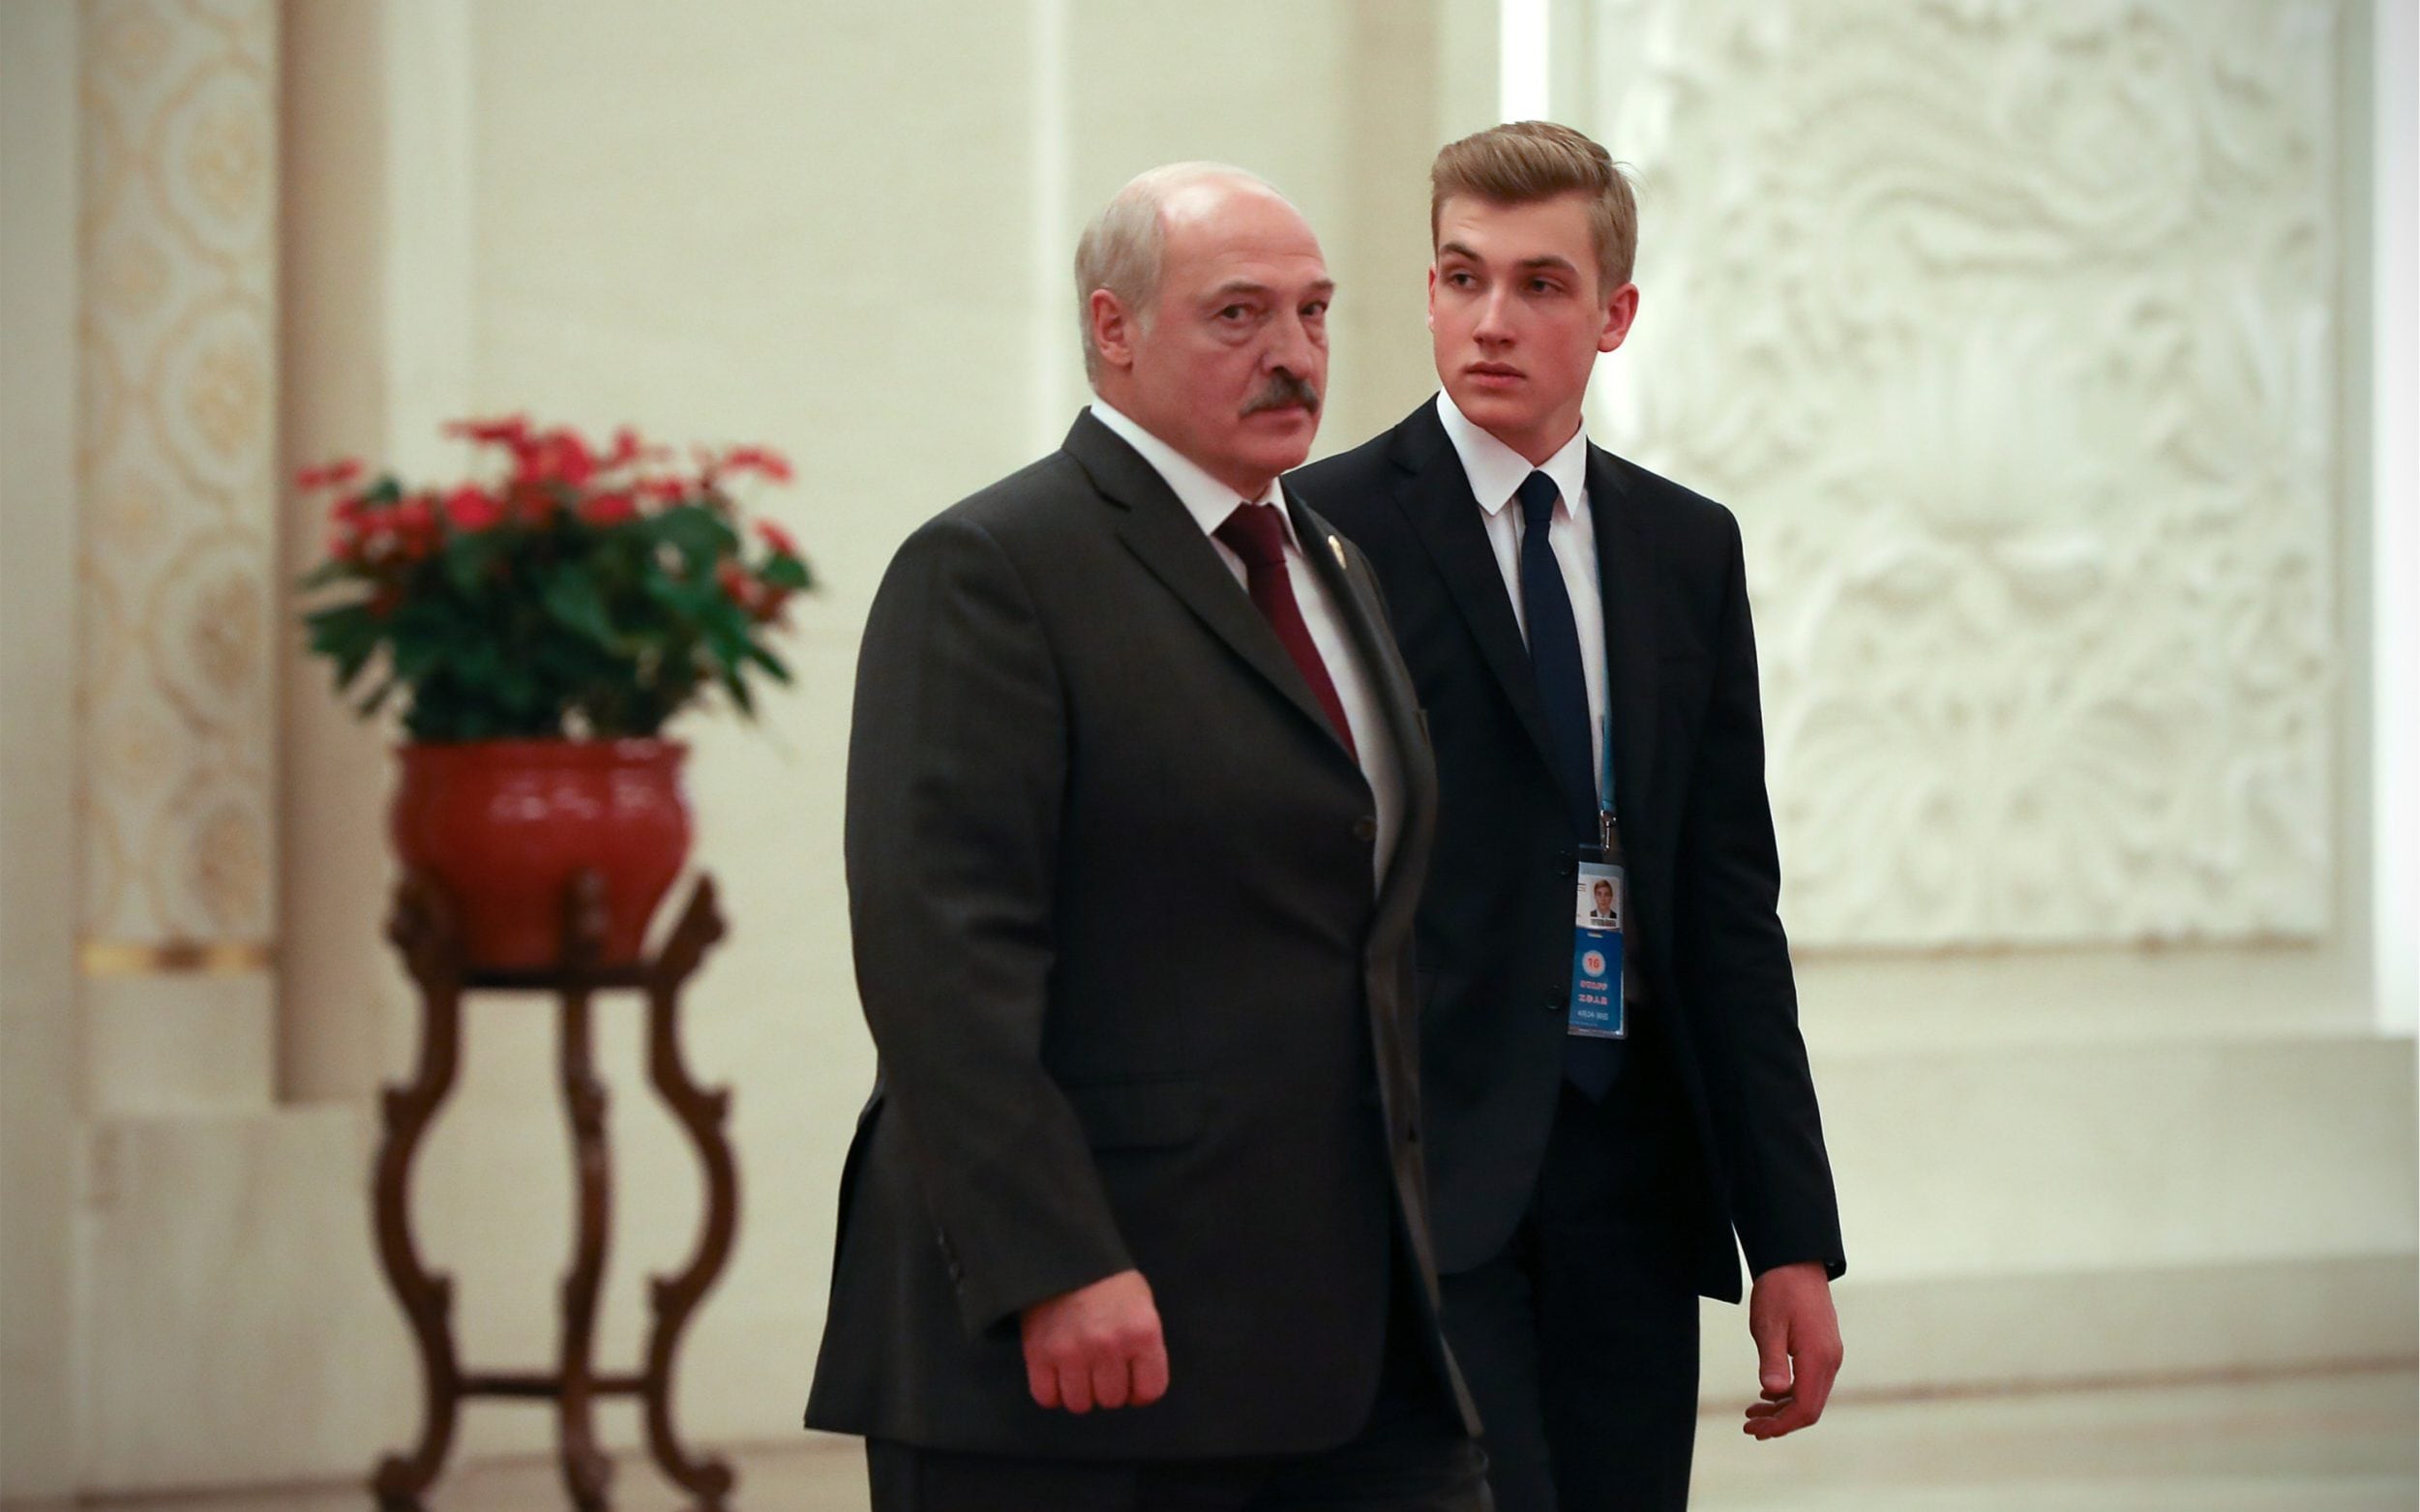 Alexander Lukashenko brings his 16-year-old son onto frontline as protests  endanger succession plans